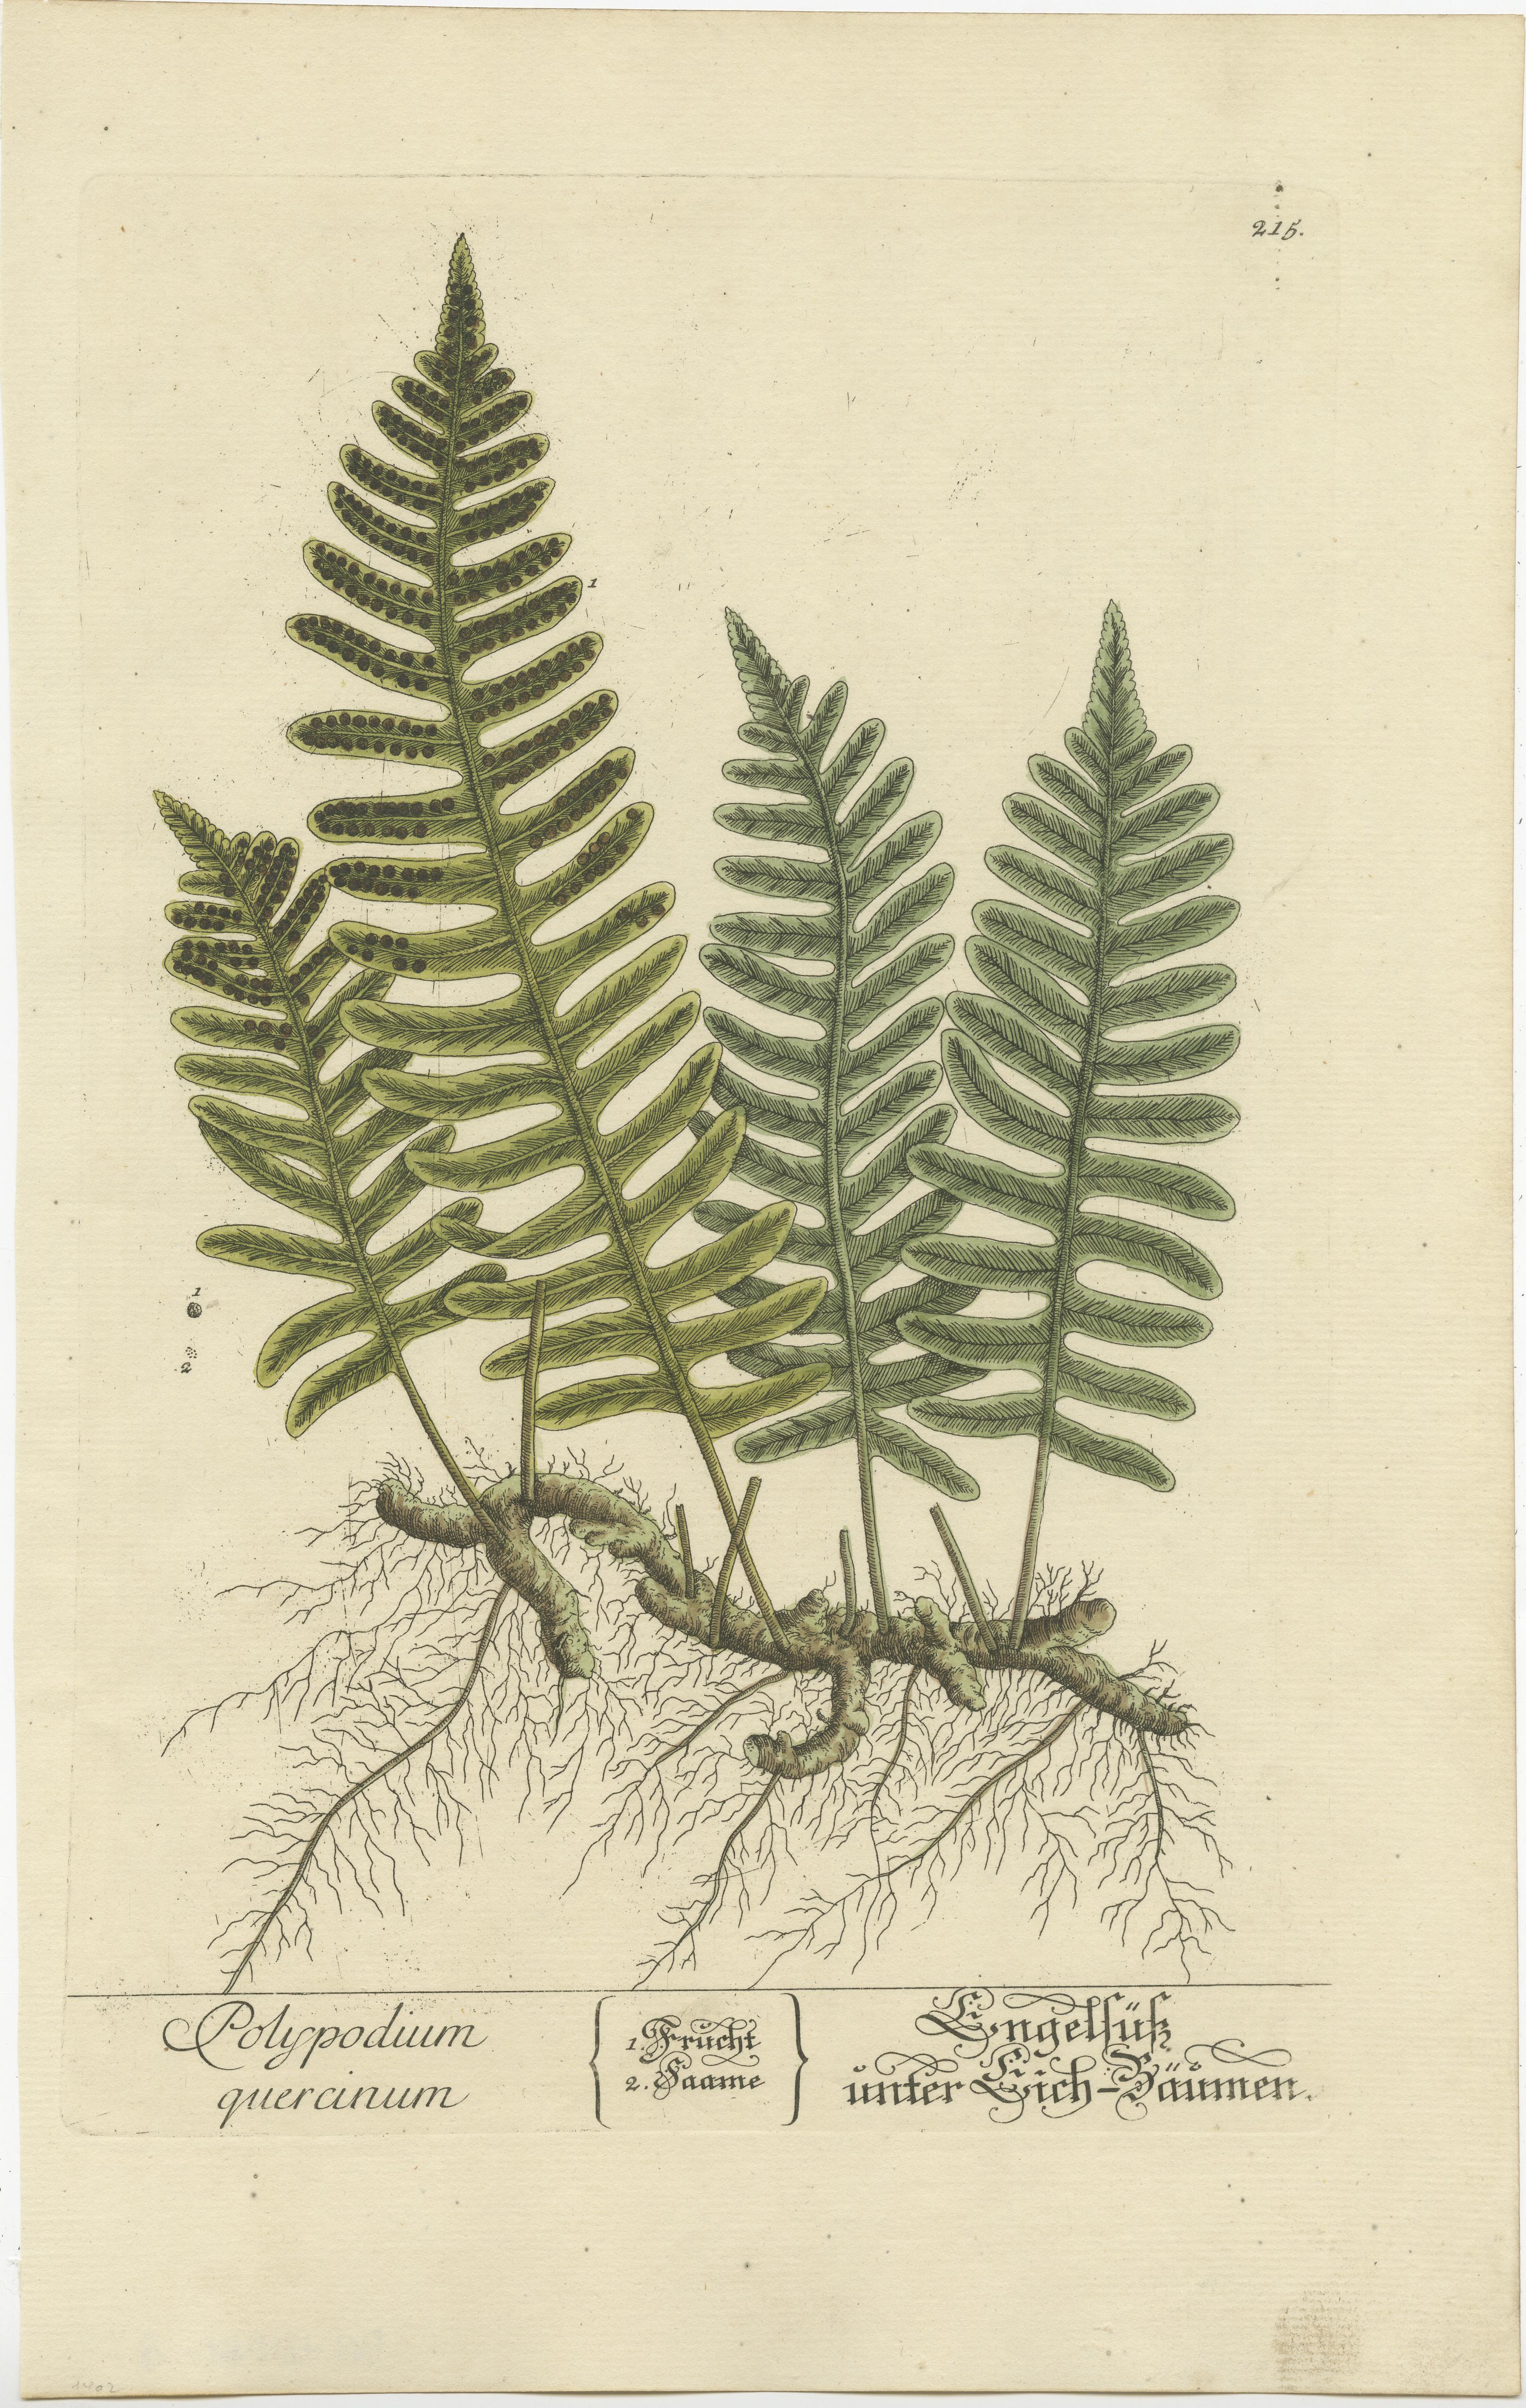 Antique print titled 'Polypodium Quercinum'. Botanical print of the Common Polypody, an evergreen fern. Published by or after Elisabeth Blackwell, circa 1750. 